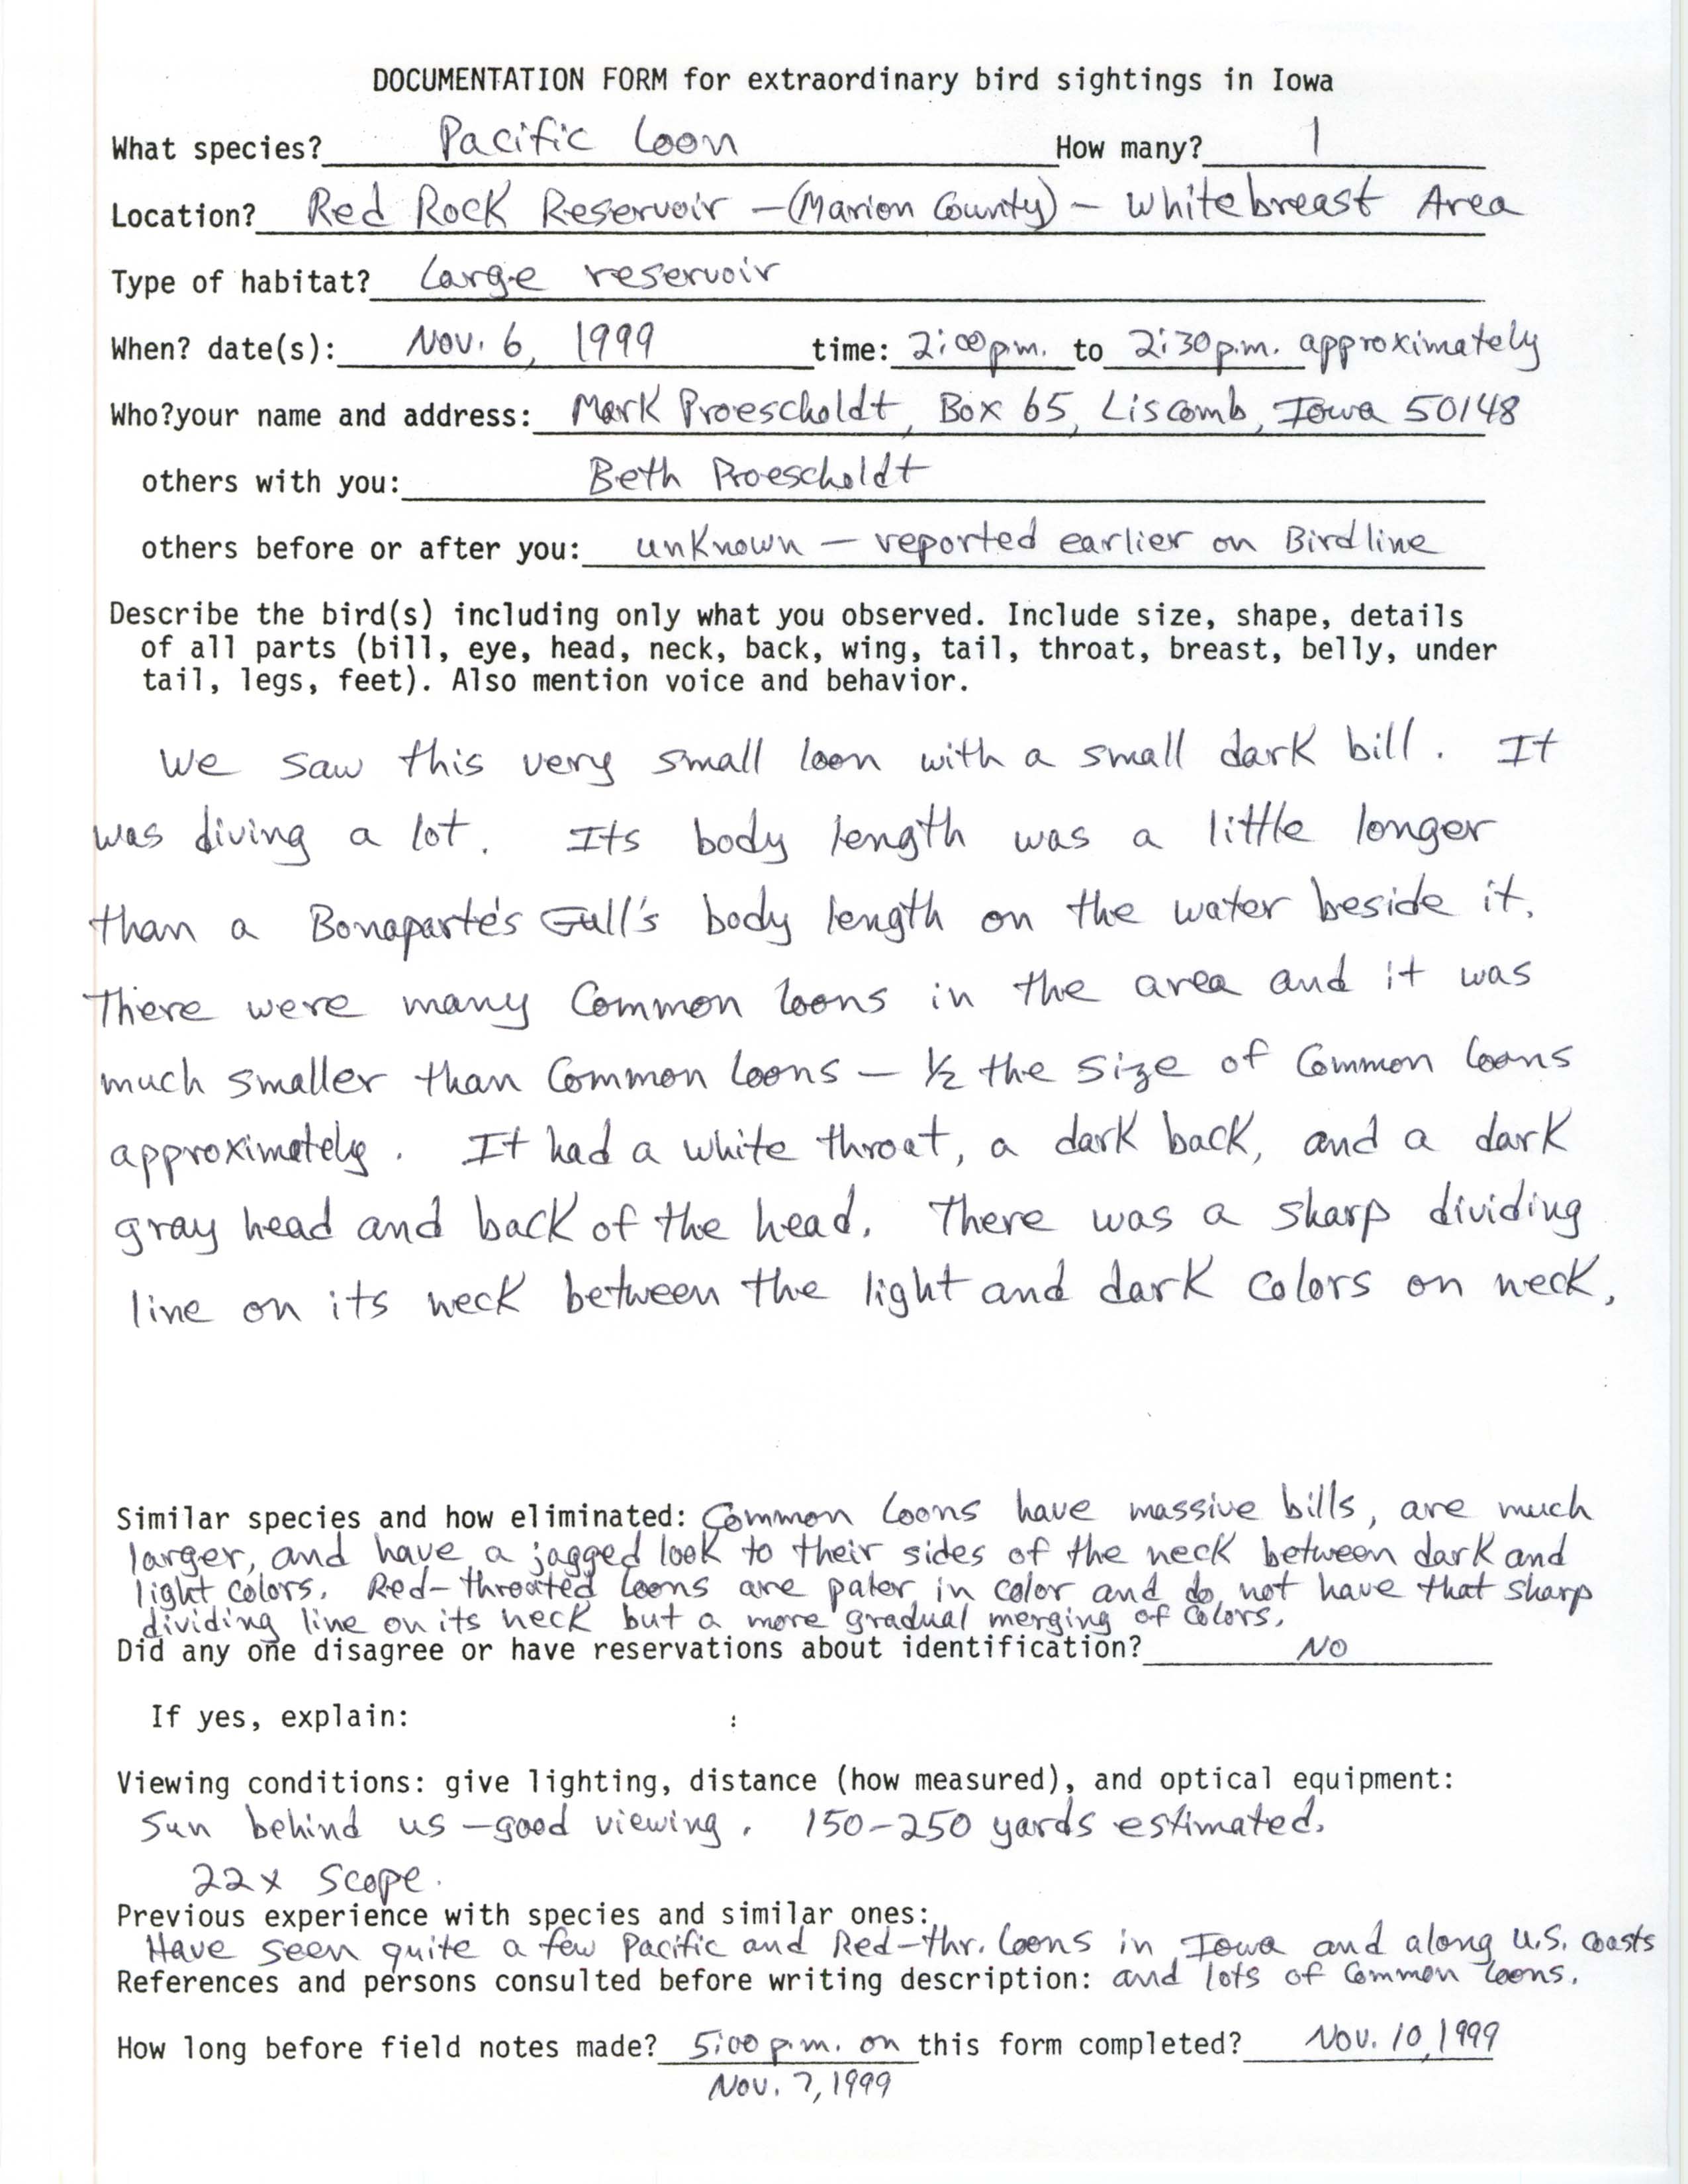 Rare bird documentation form for Pacific Loon at Red Rock Reservoir, 1999